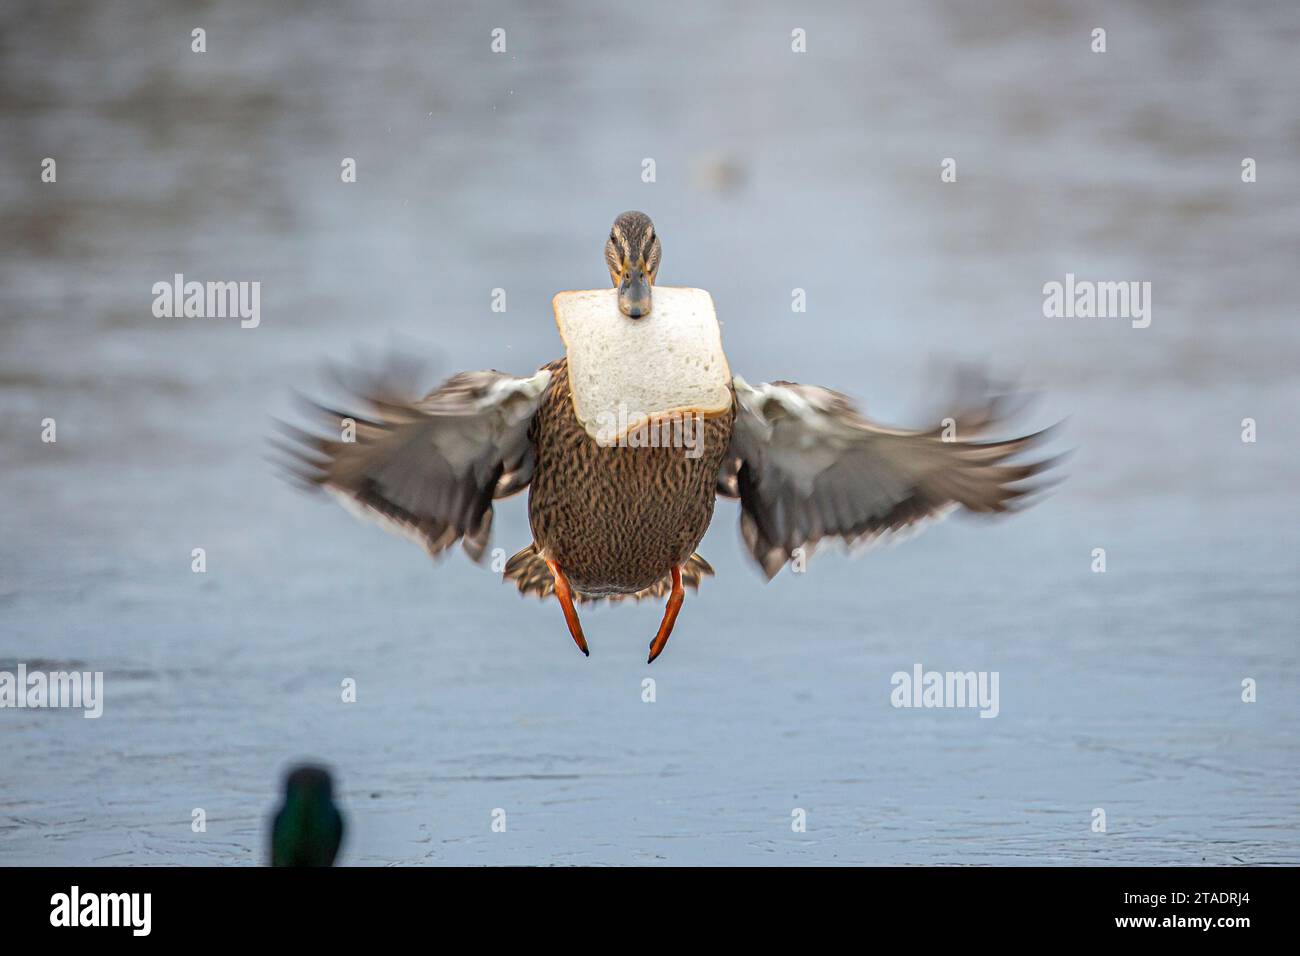 Kidderminster, UK. 30th November, 2023. UK weather: a harsh freeze hits the Midlands this morning leaving temperatures low enough to freeze local wildlife pools. Mallard ducks struggle to find food on their frozen pool but take full advantage of the kindness of local residents feeding them bread. Credit: Lee Hudson/Alamy Live News Stock Photo